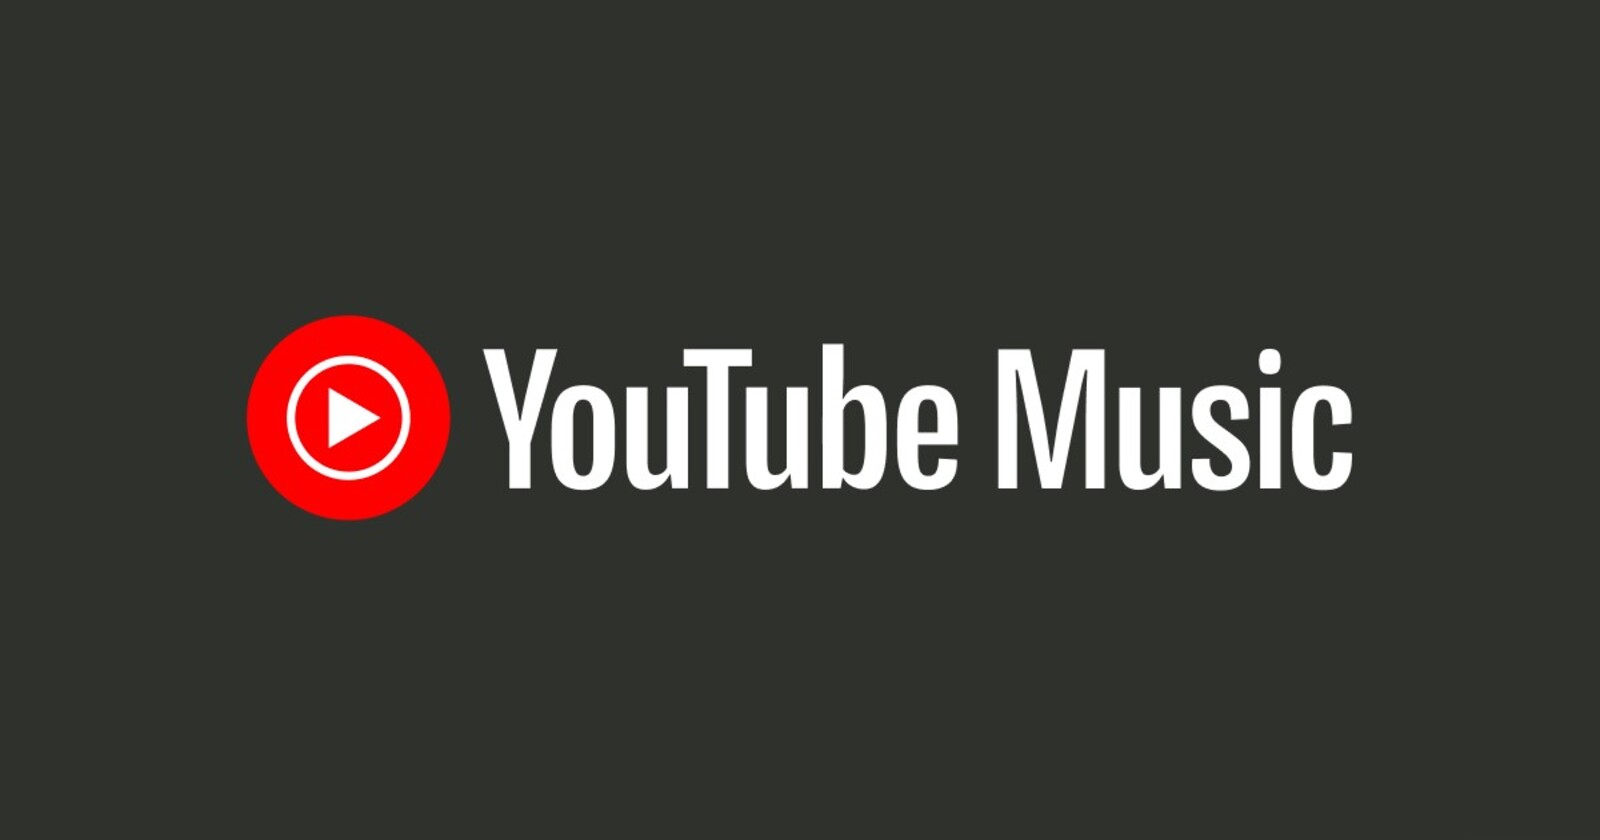 Assistant with Bard may get a 'YouTube Music' extension to help you control music on your Pixel phone